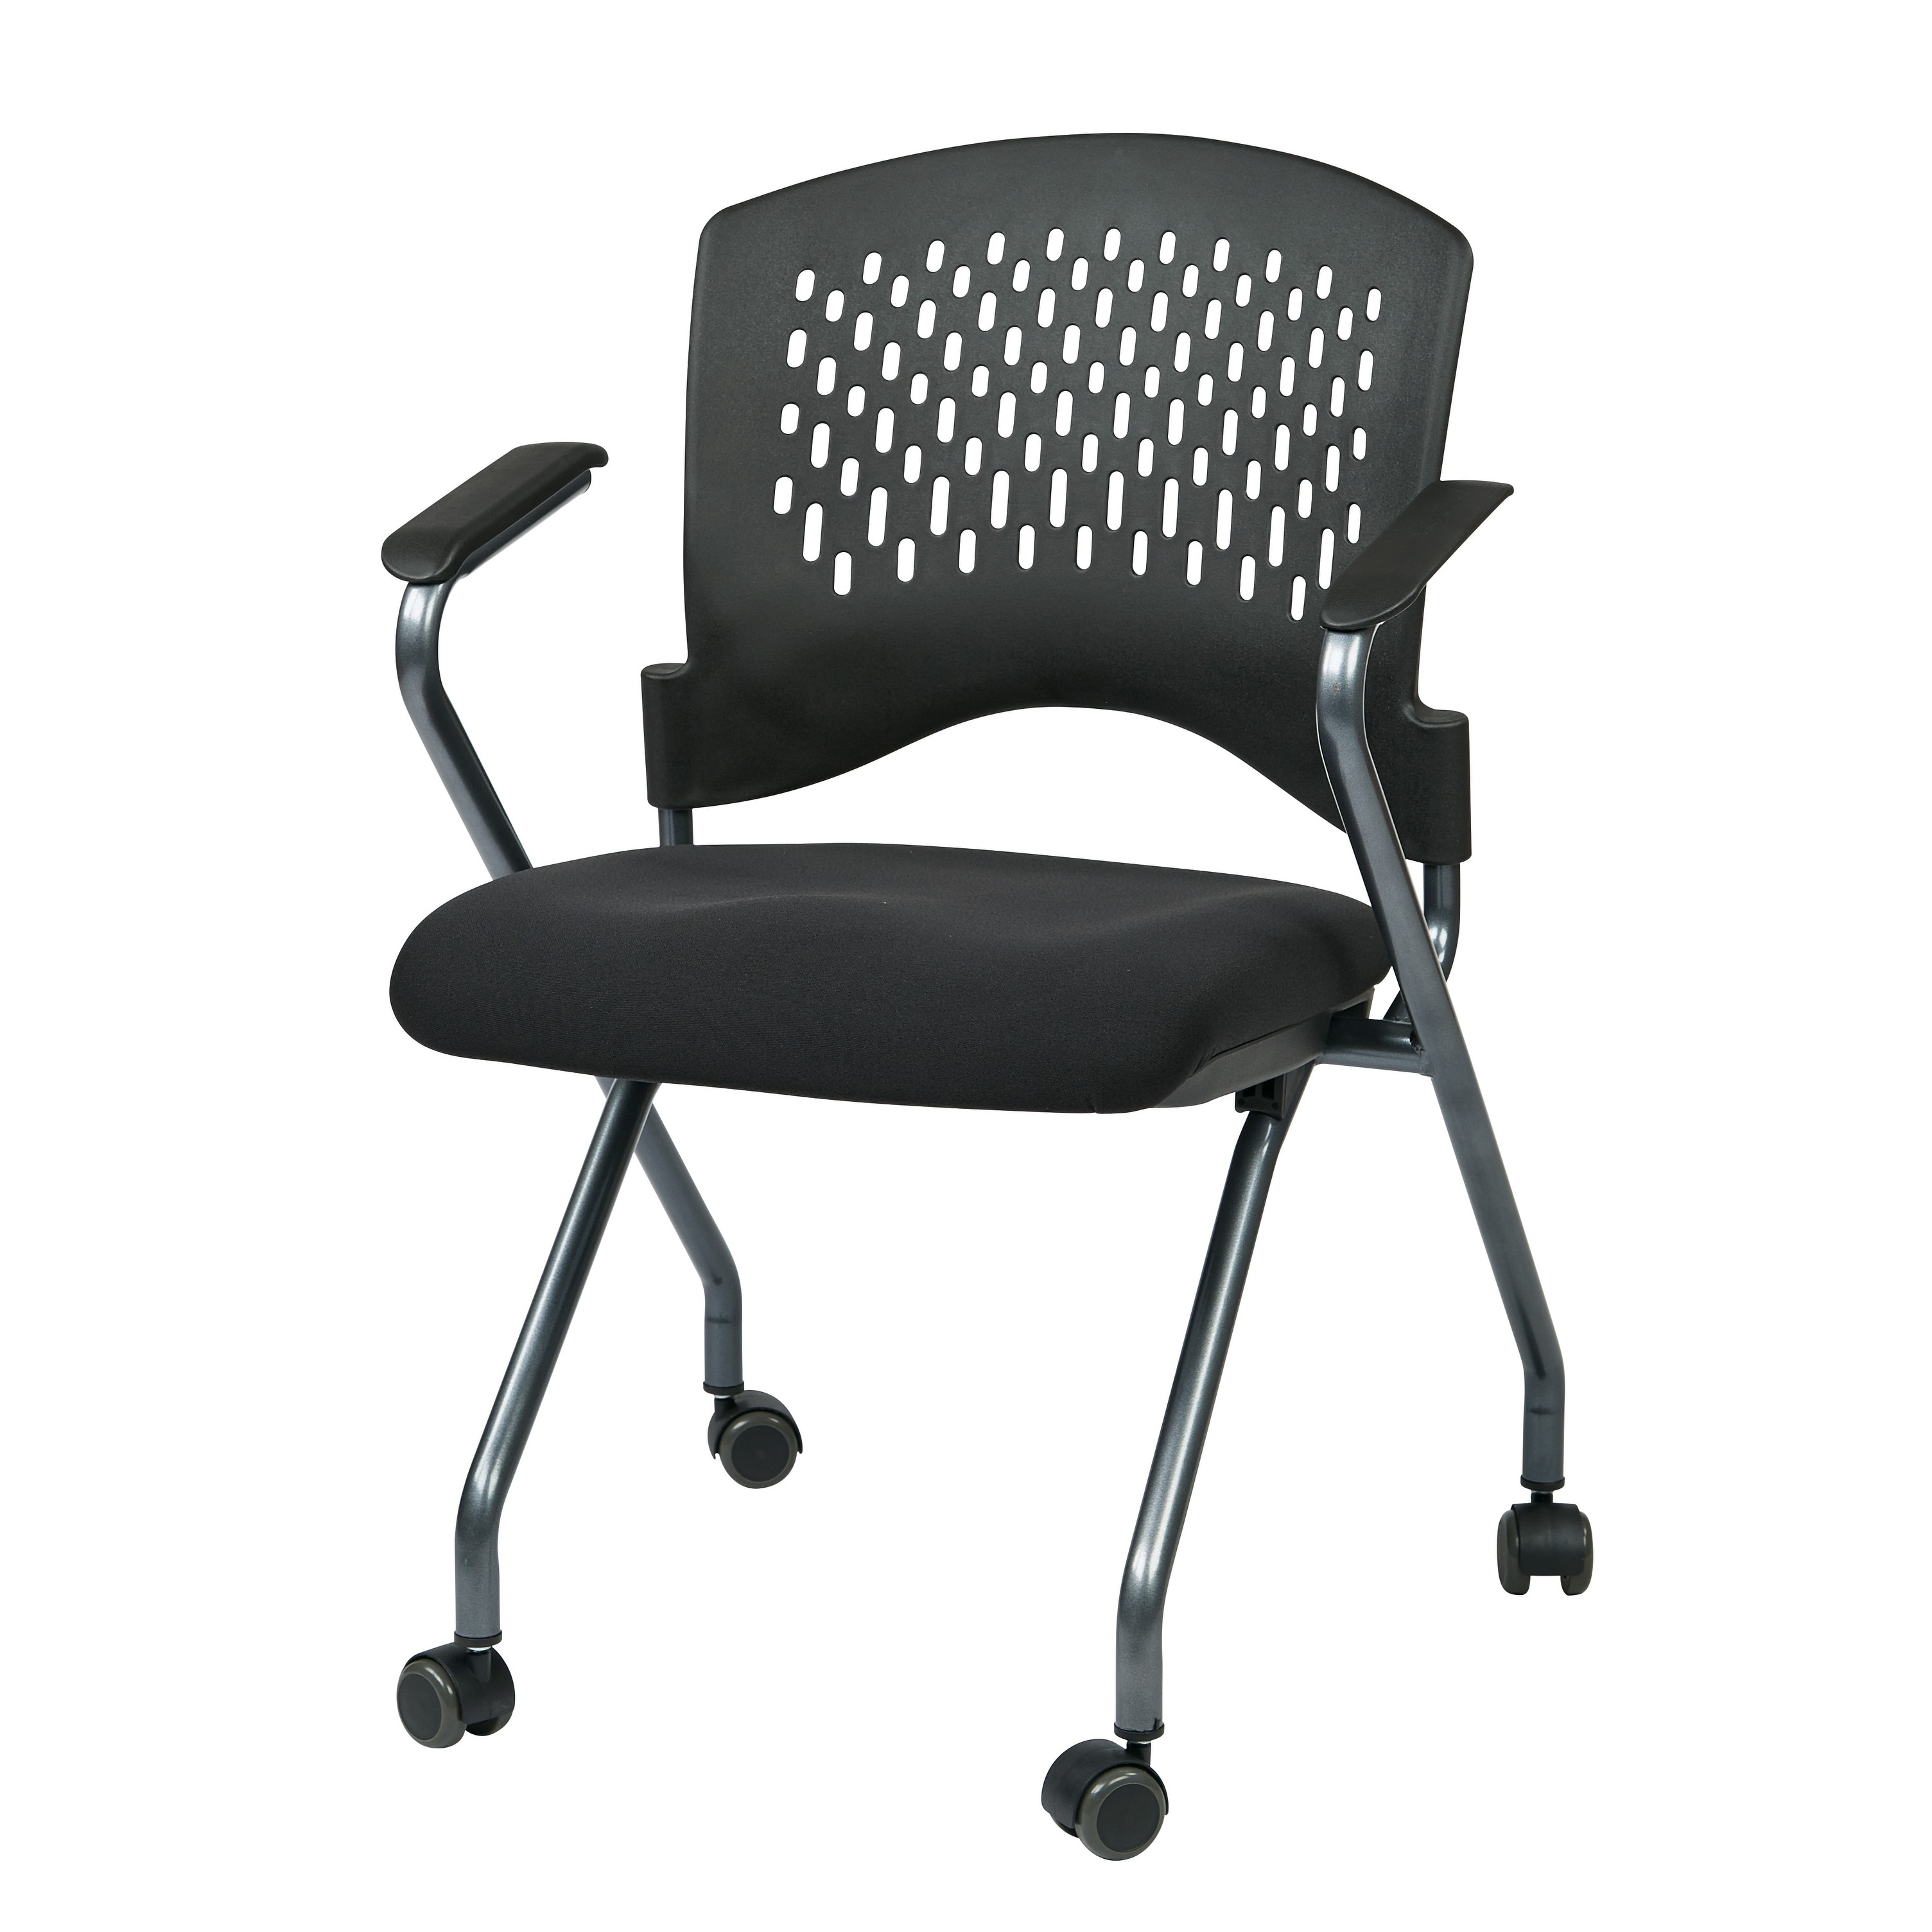 https://ak1.ostkcdn.com/images/products/6710304/Office-Star-Deluxe-Folding-Chair-with-Ventilated-Plastic-Wrap-Around-Back-2-Pack-48b69adb-90cf-4c02-9393-1f0ac56fa3d7.jpg